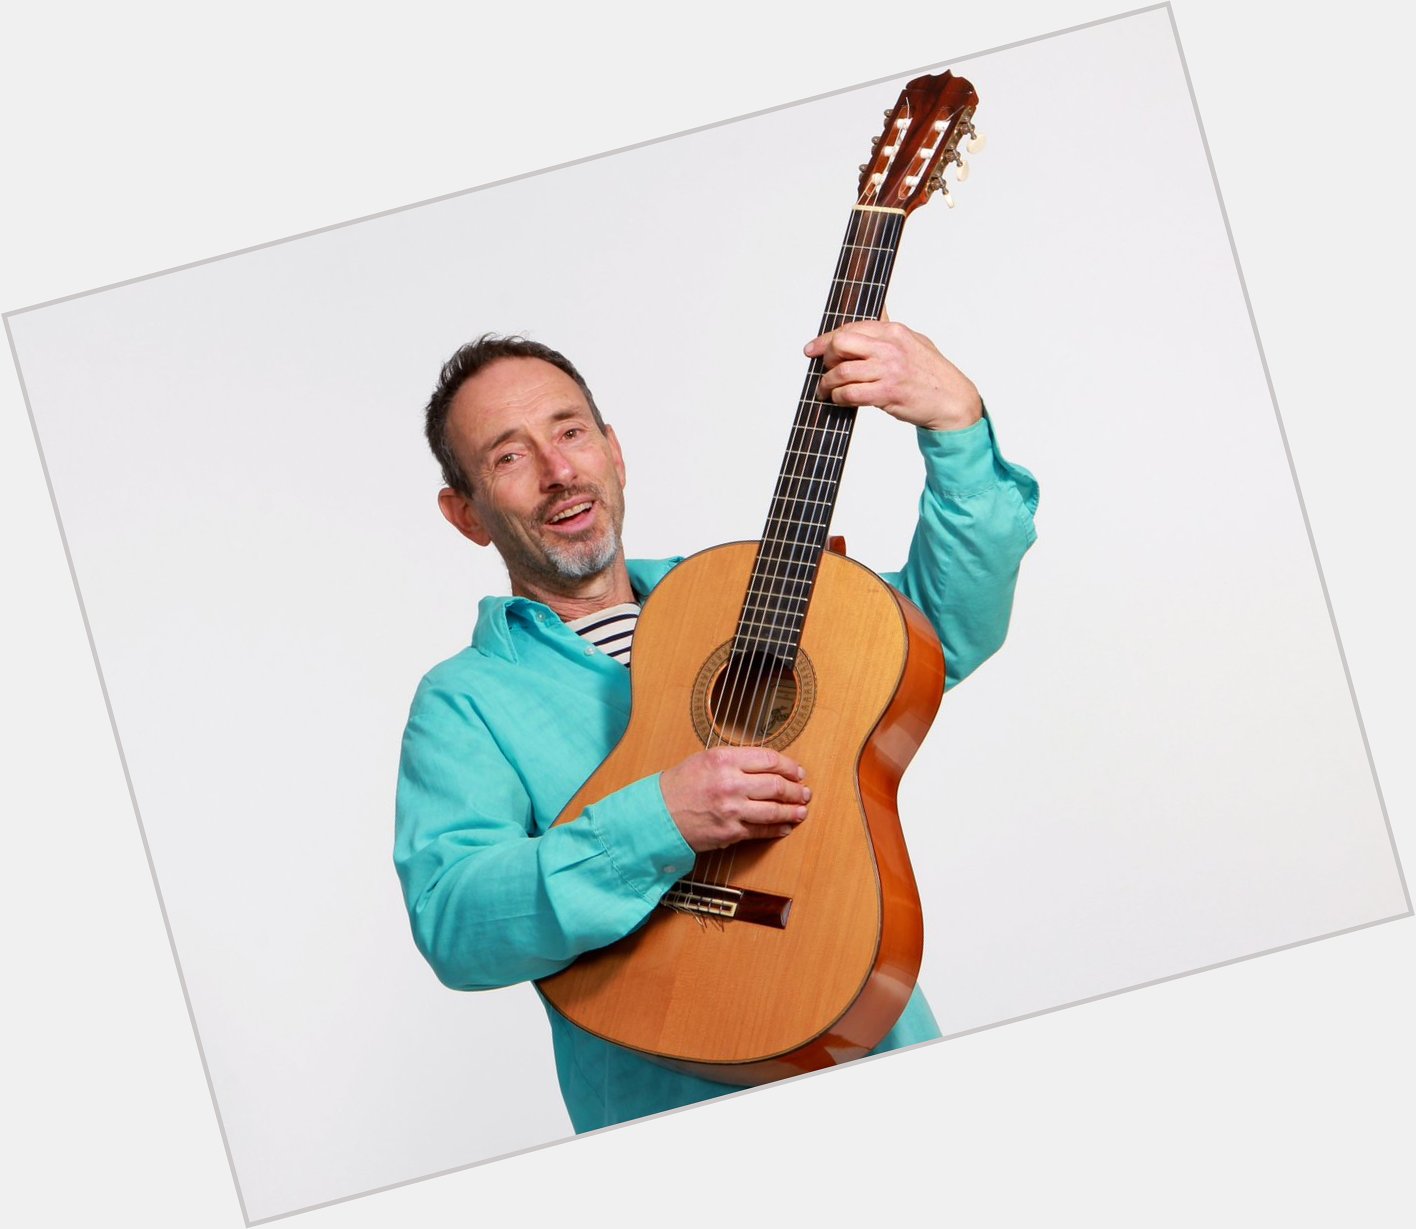 I know he\s not on social media, but happy birthday to one of my all-time faves, Jonathan Richman. 